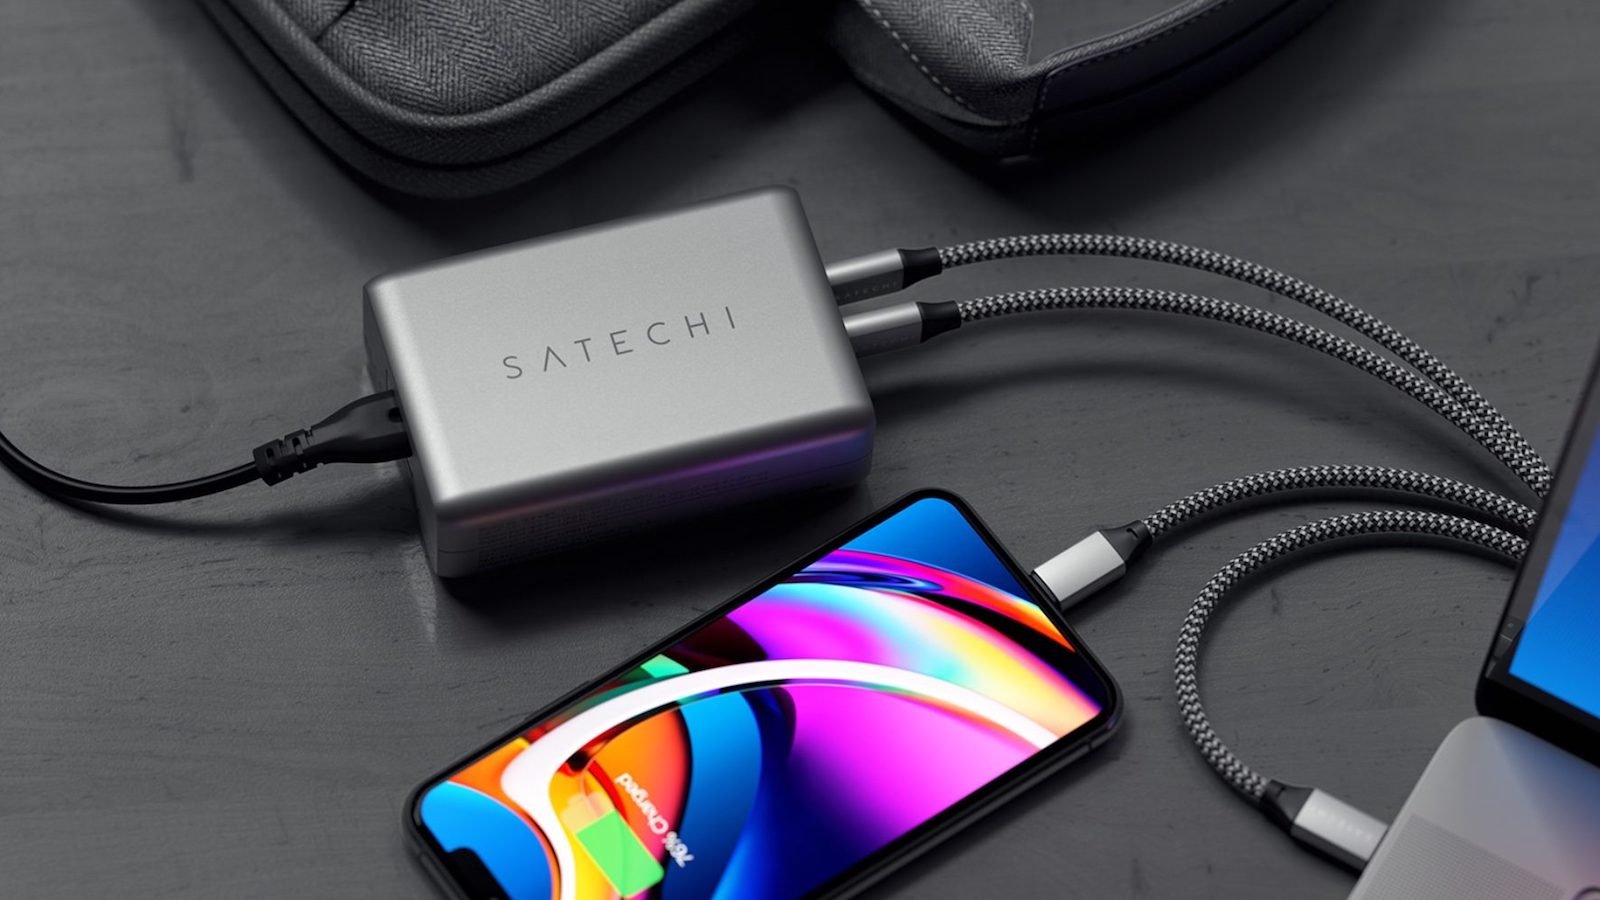 Satechi 100W USB-C PD Compact GaN Charger quickly powers your devices